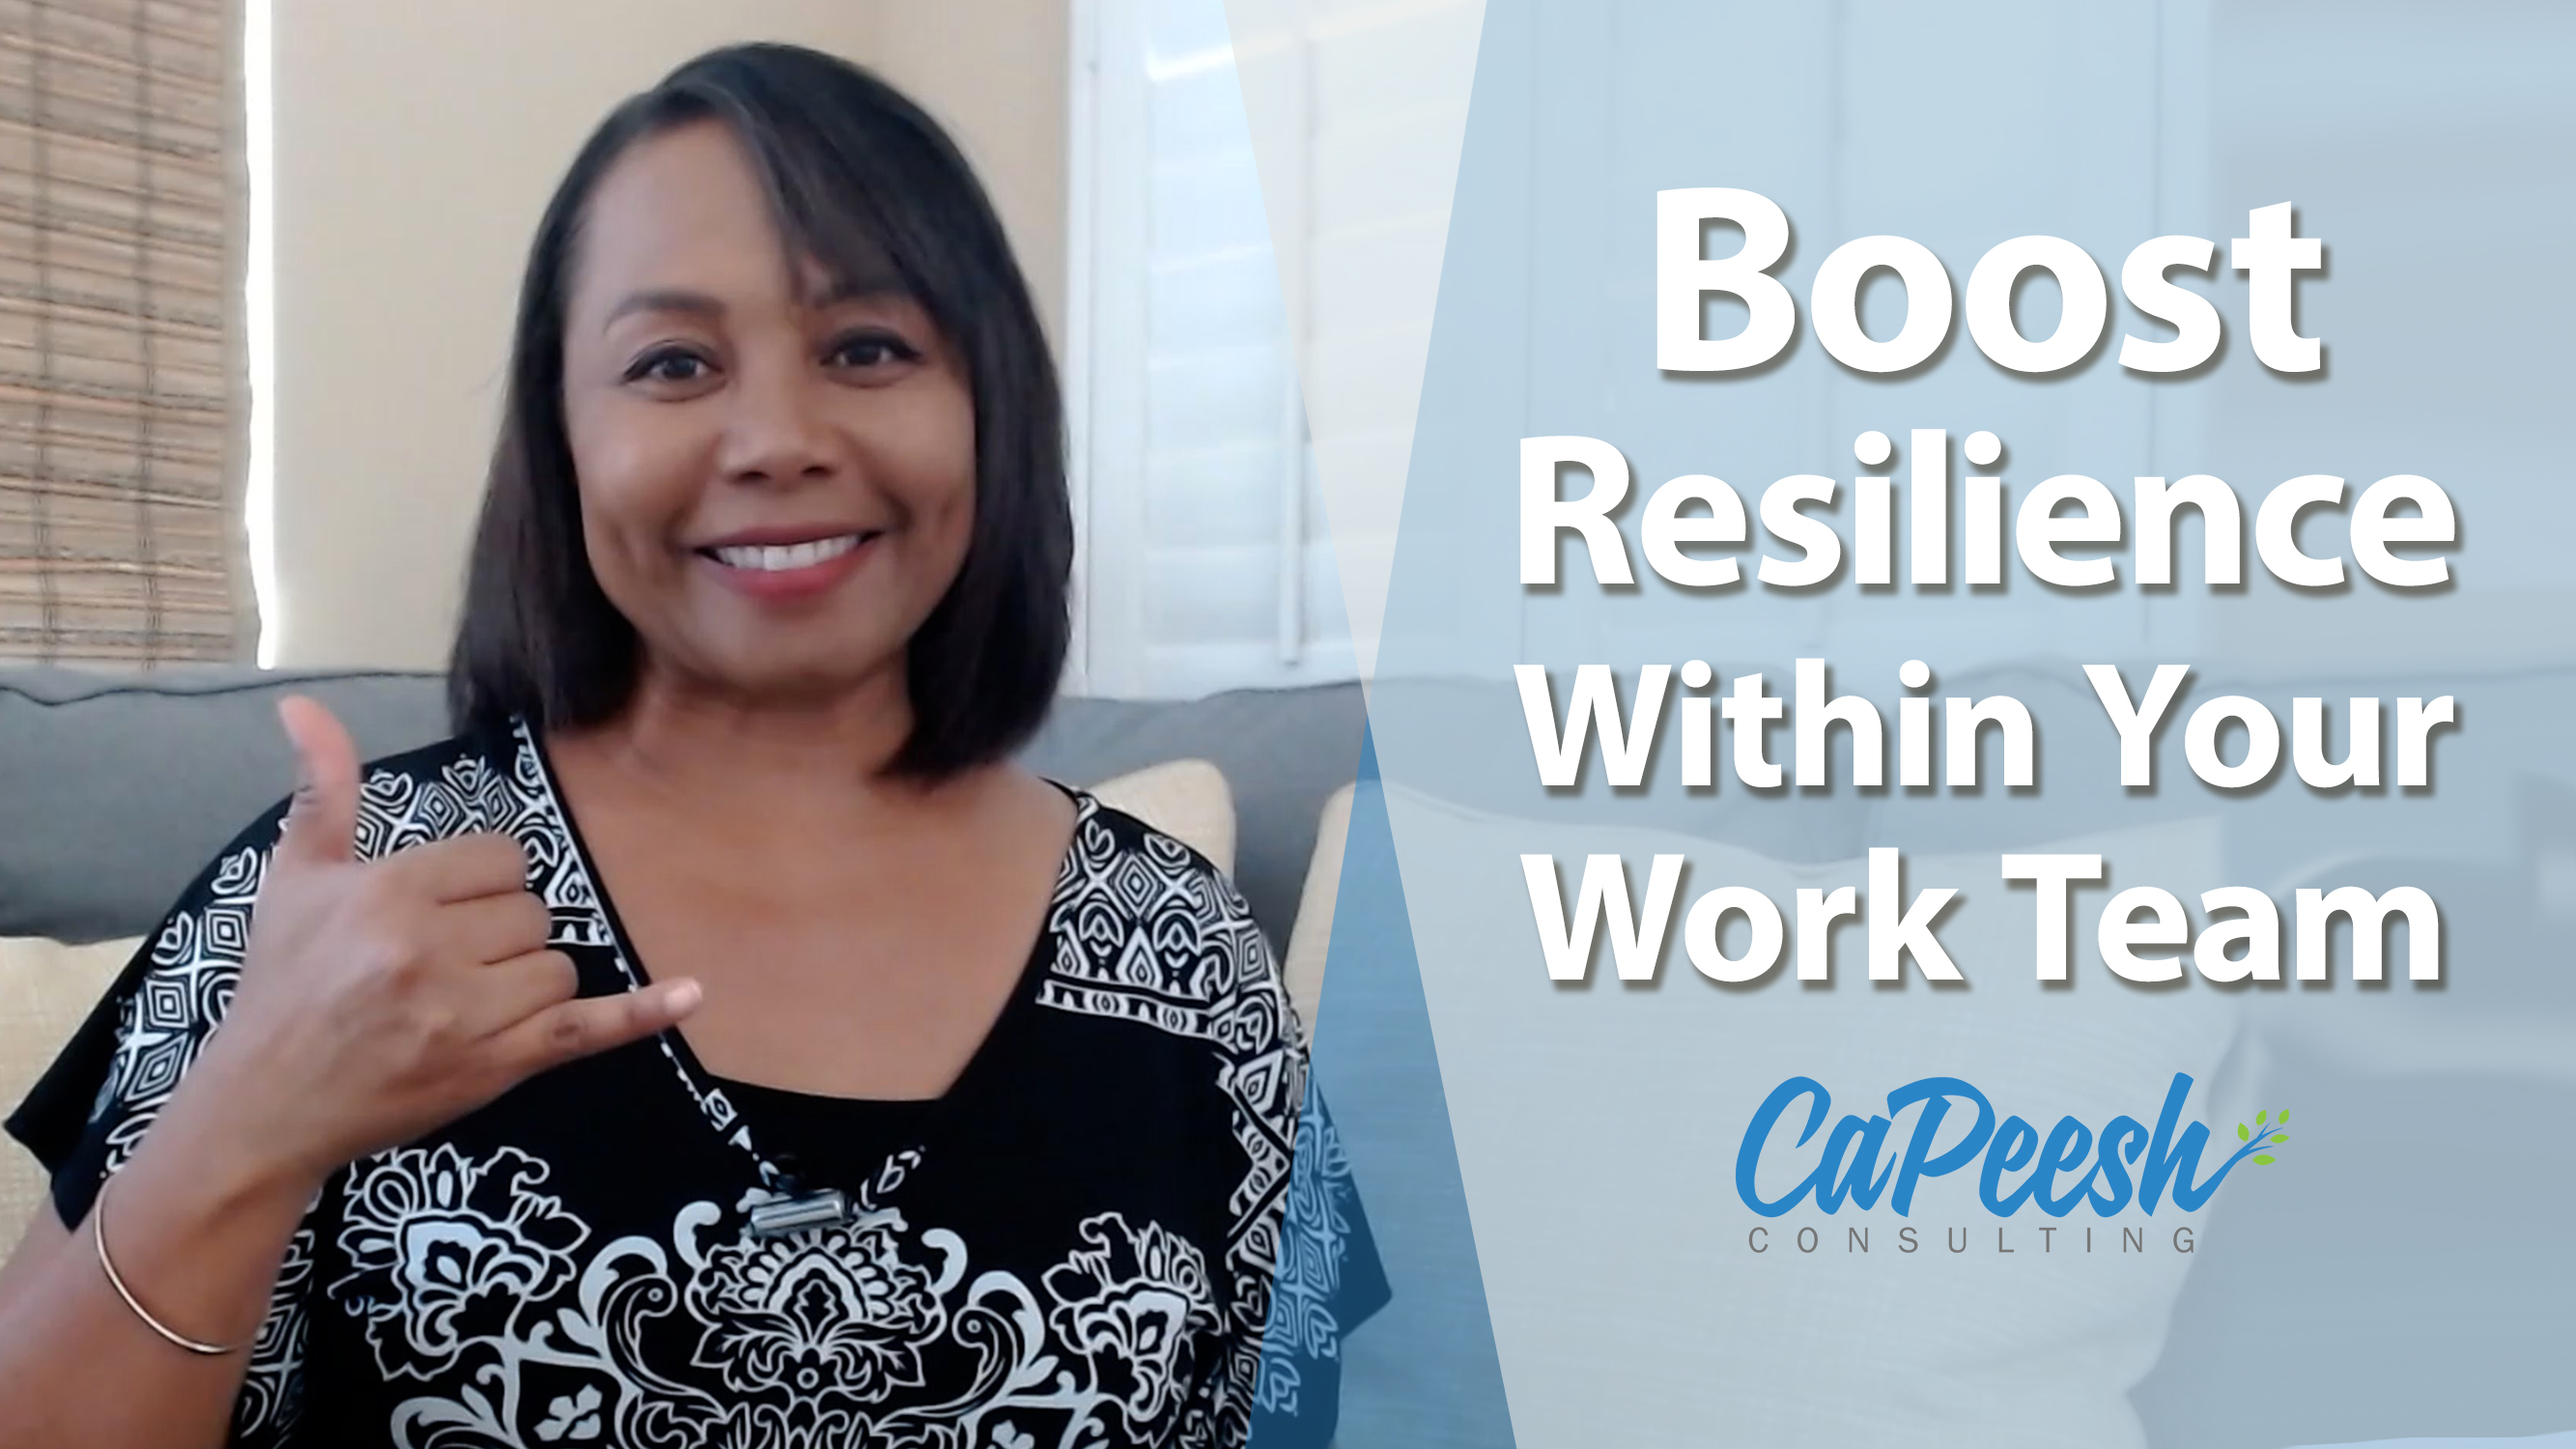 Boosting Your Resilience